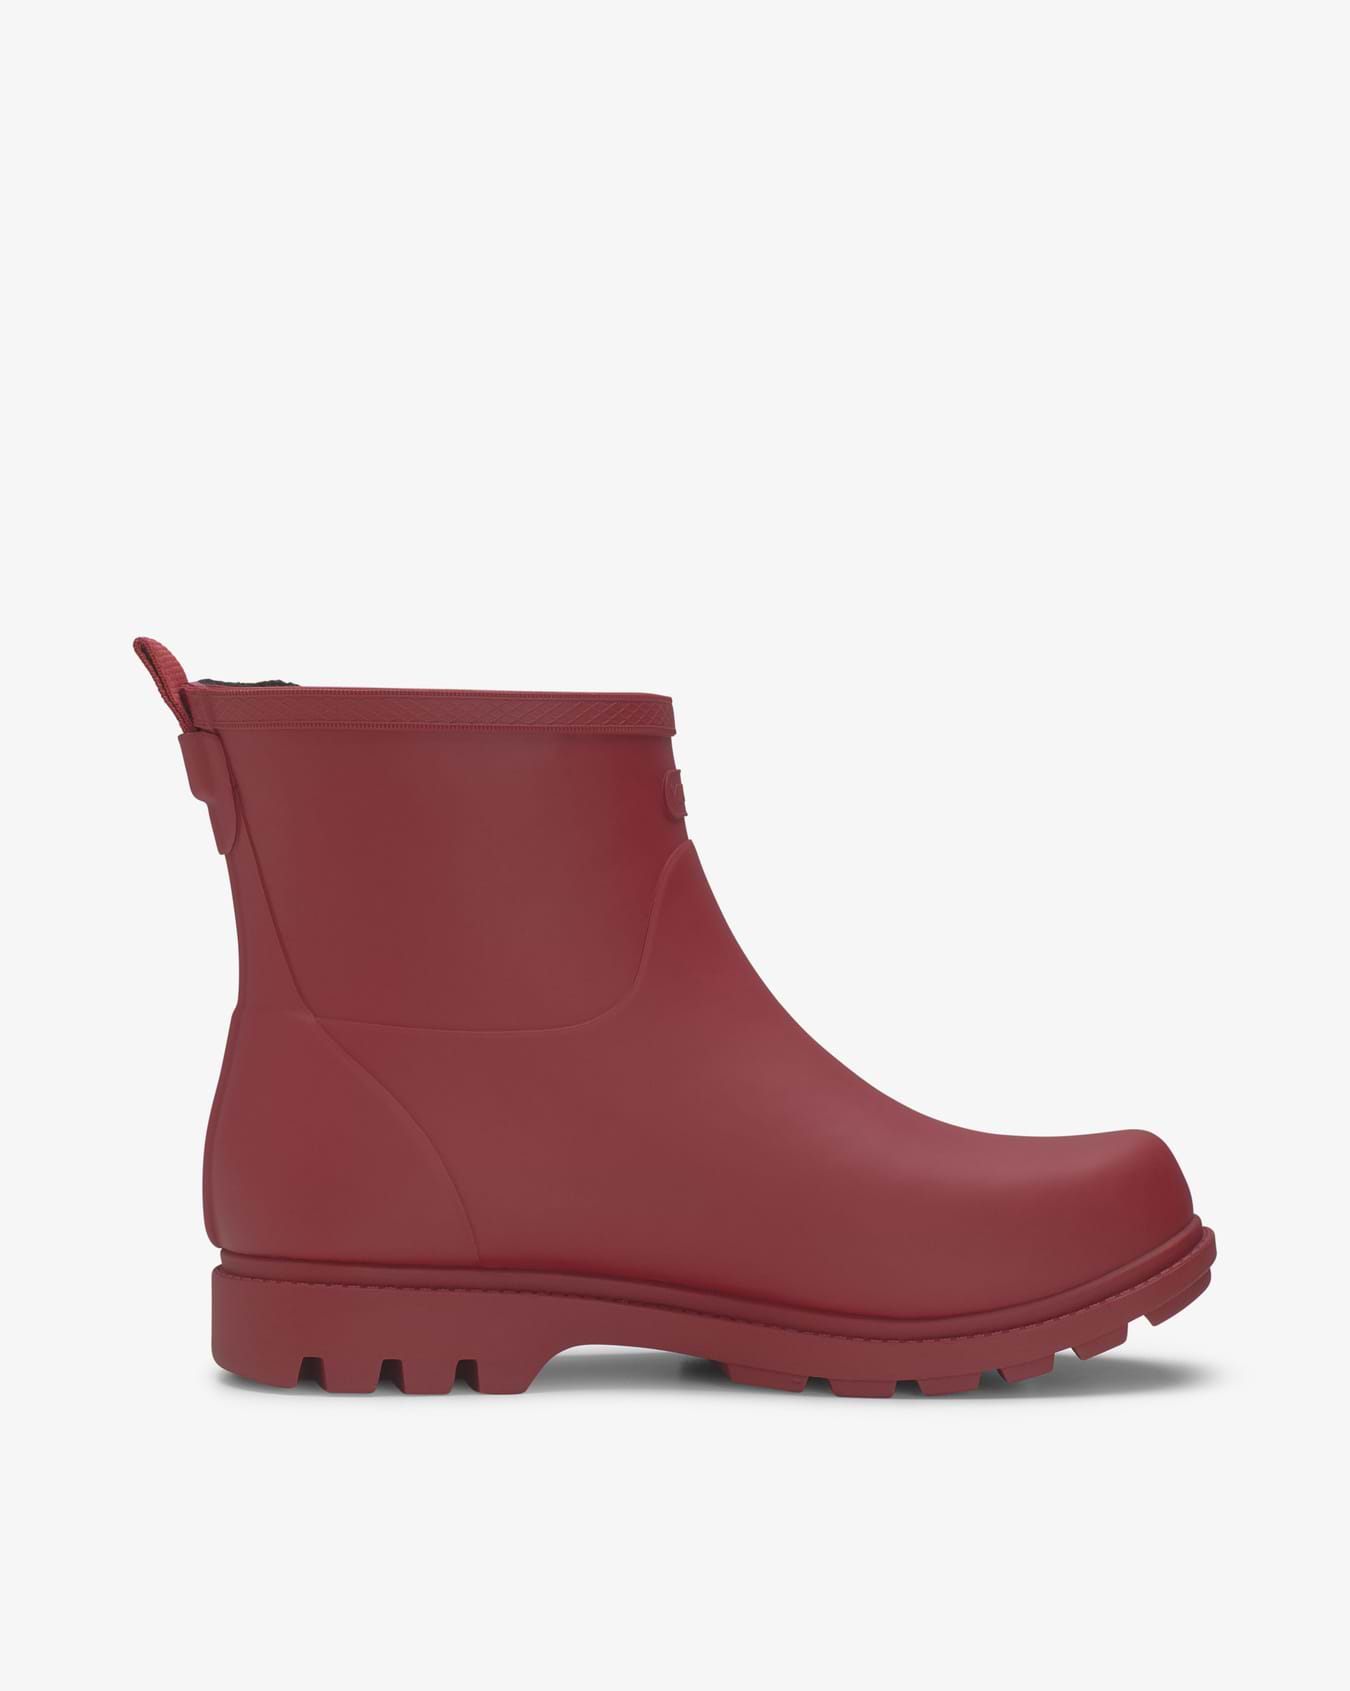 Noble Warm Dark Red Rubber Boot